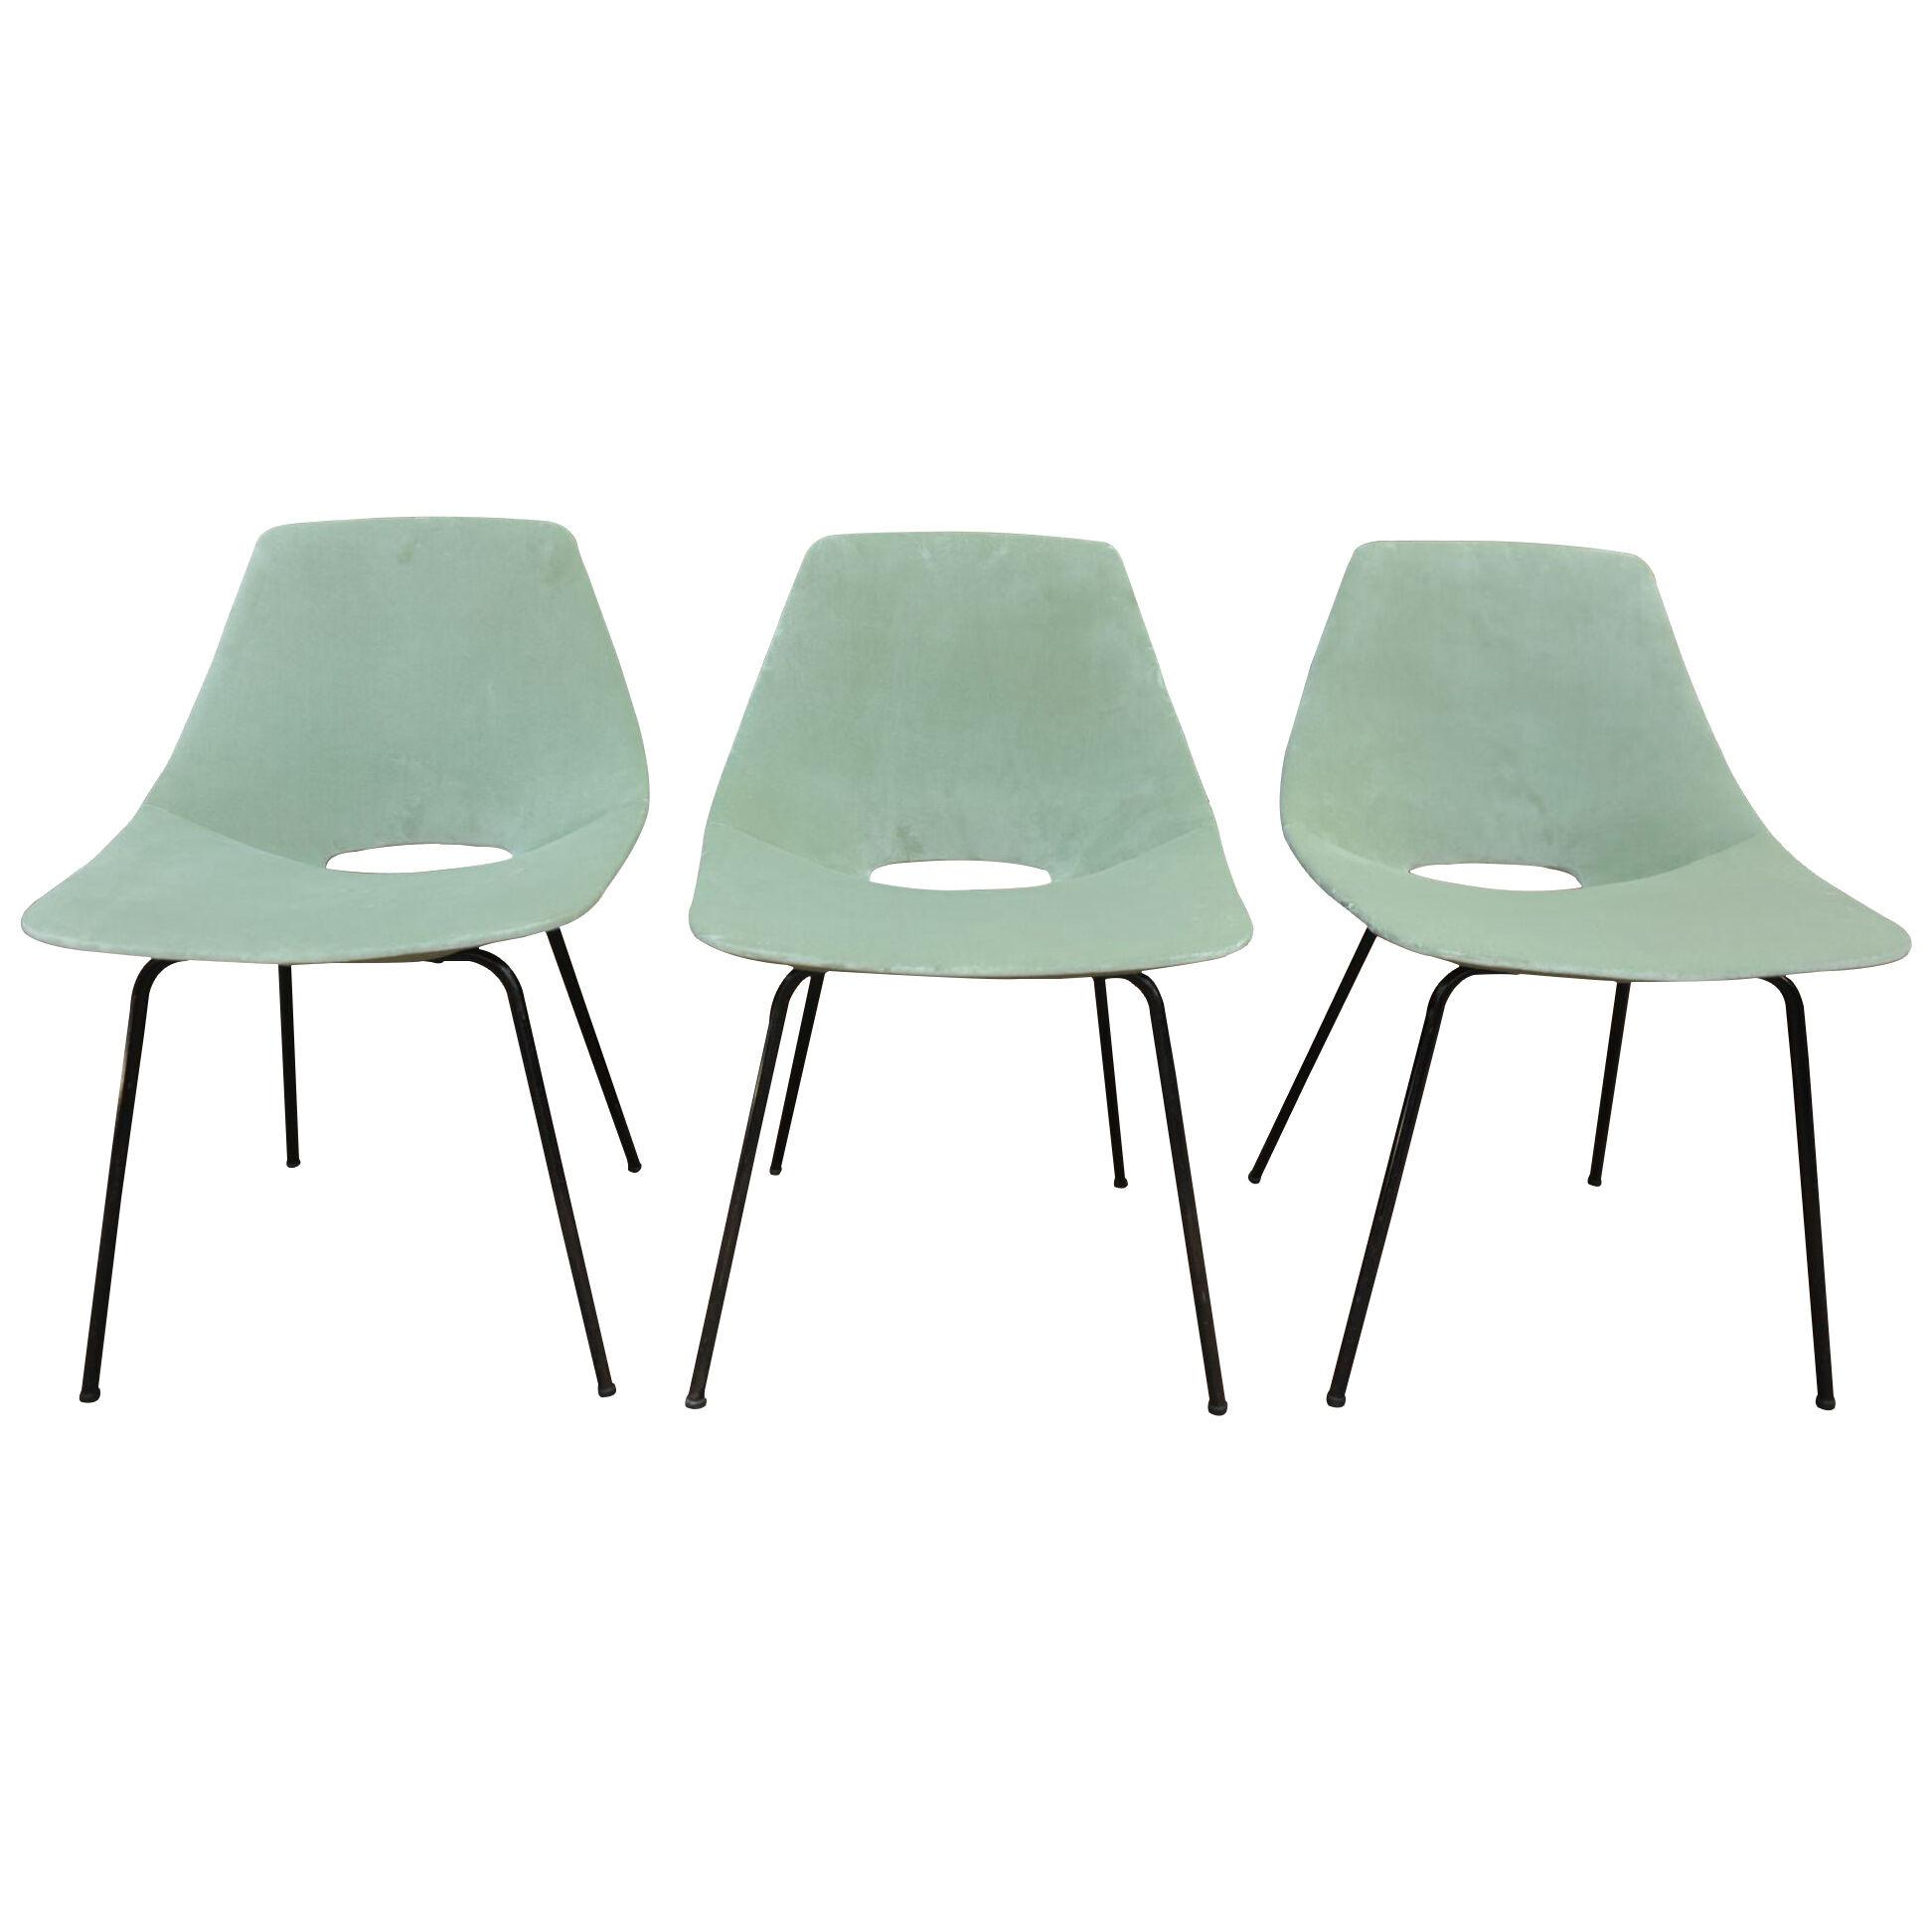 Set of 6 Tonneau Chairs by Pierre Guariche for Steiner, 1954